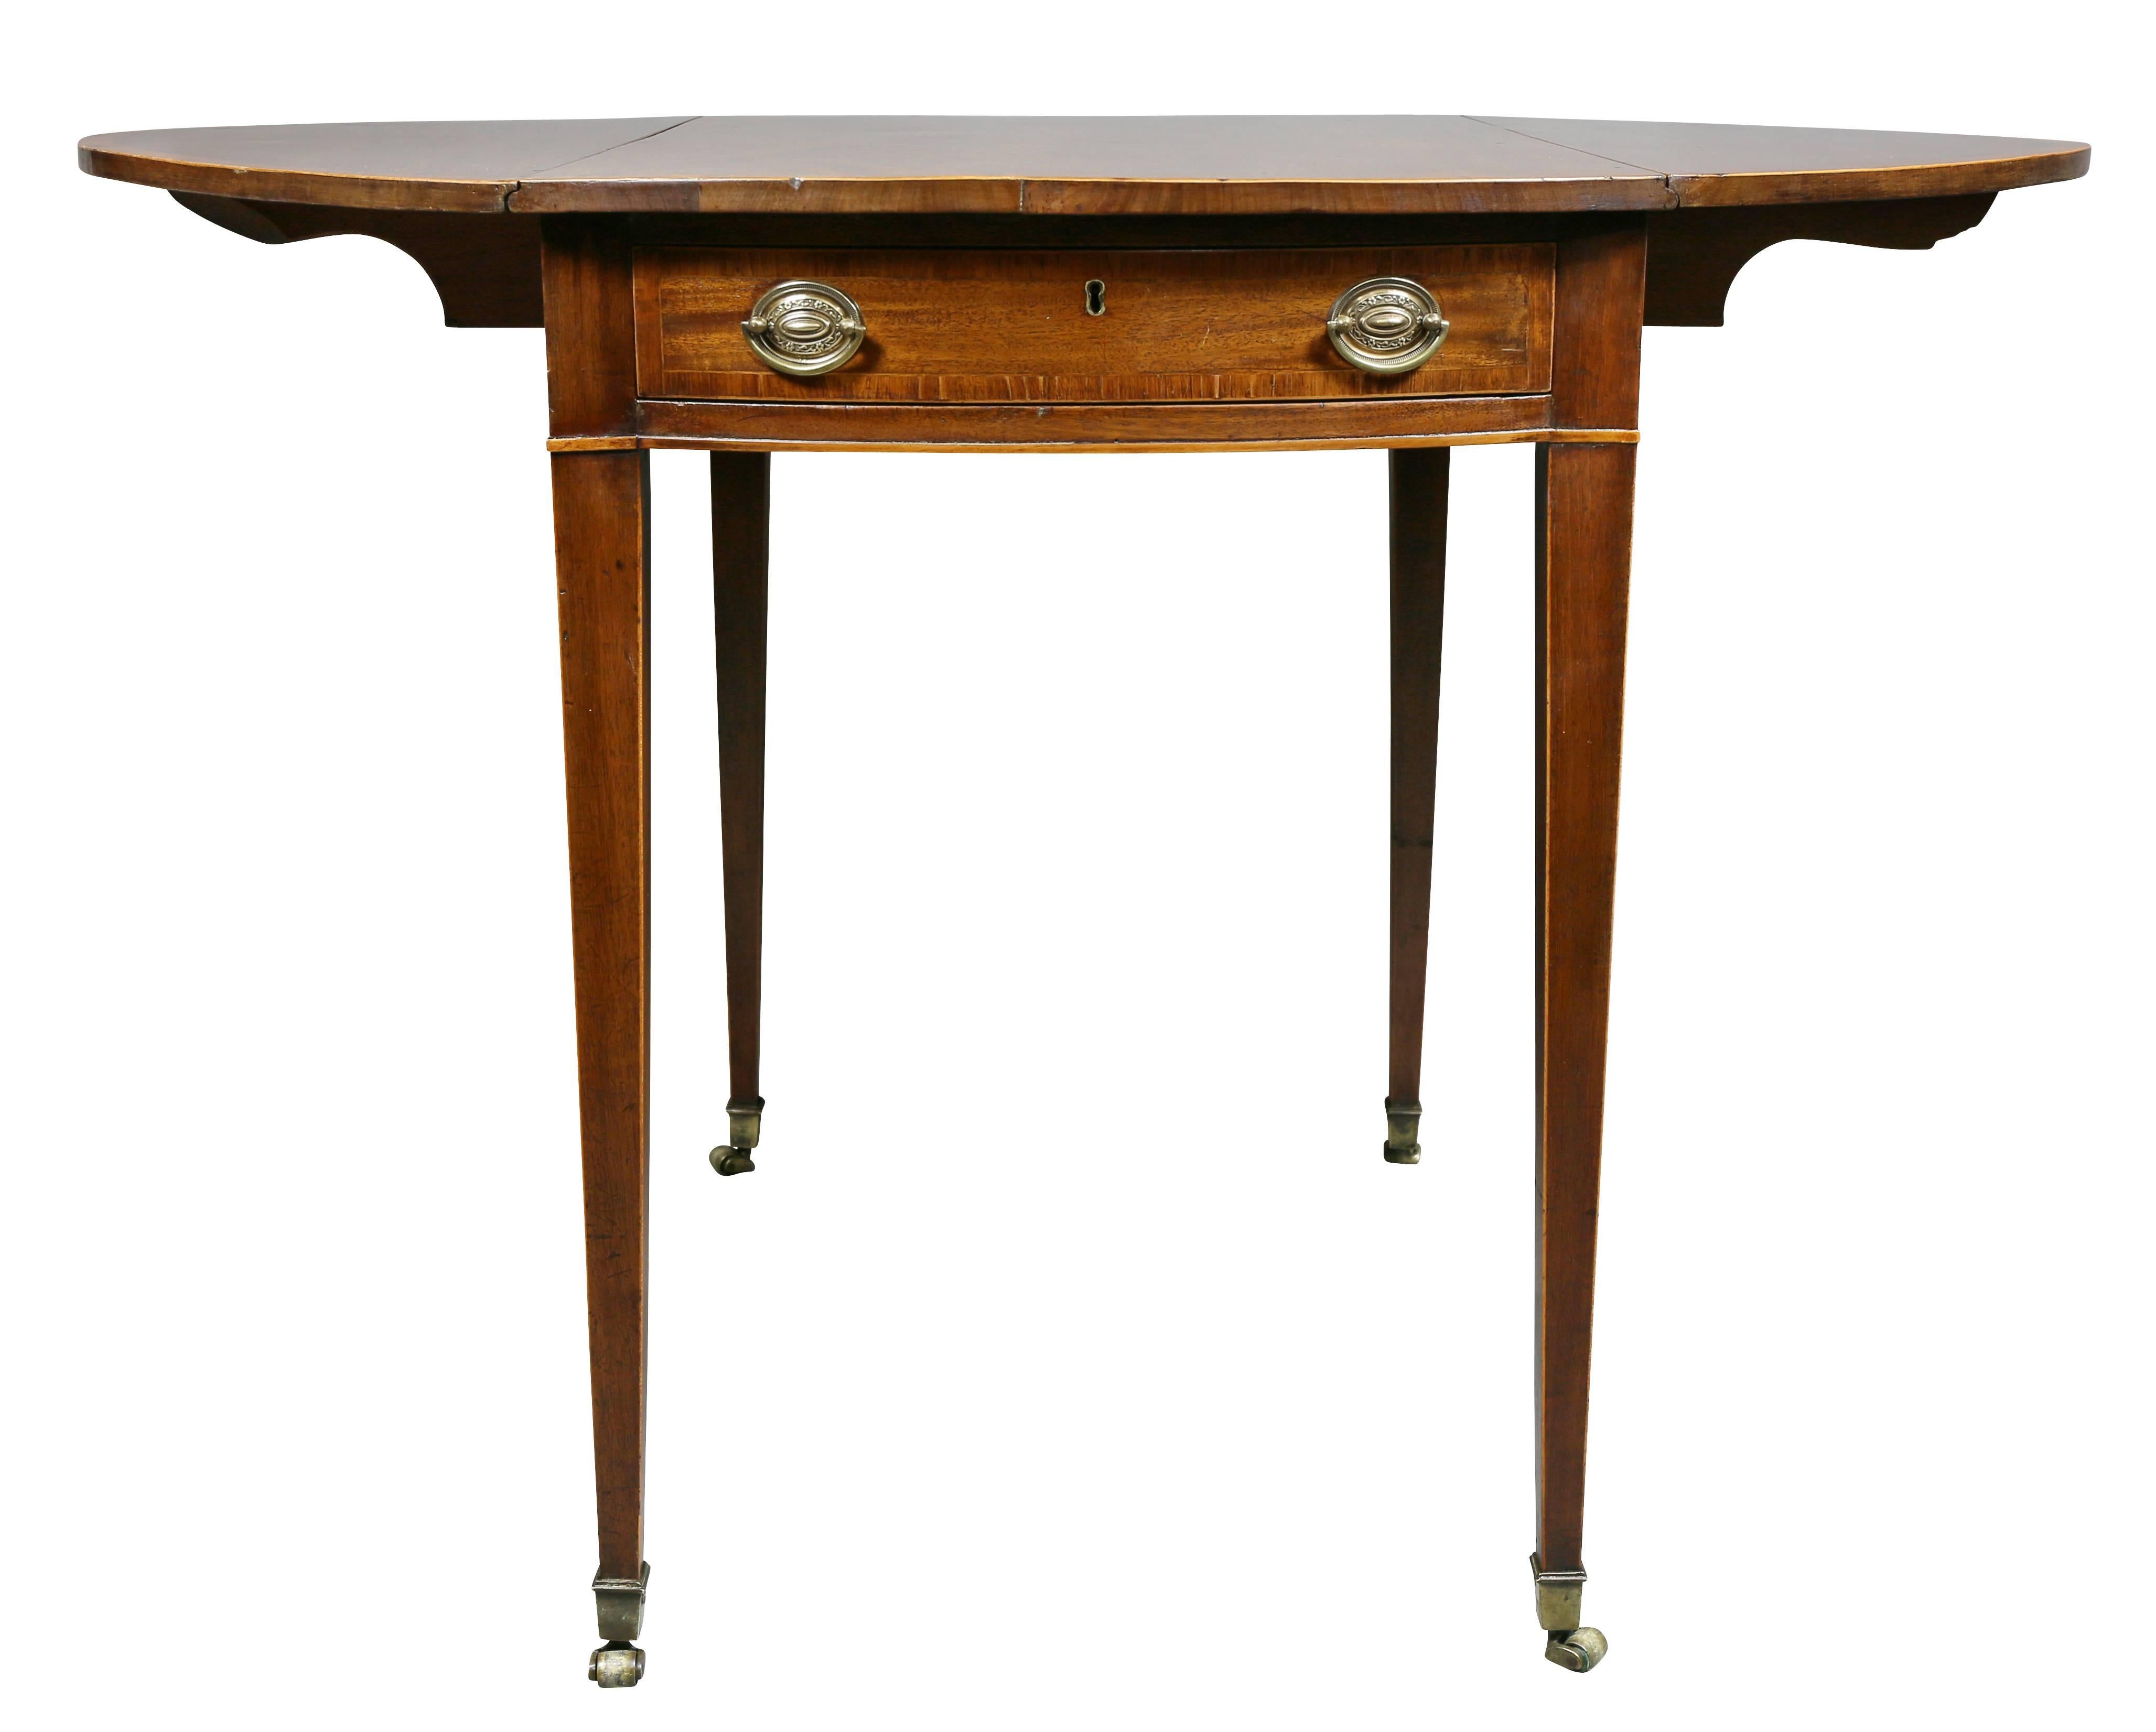 English George III Mahogany and Rosewood Banded Pembroke Table